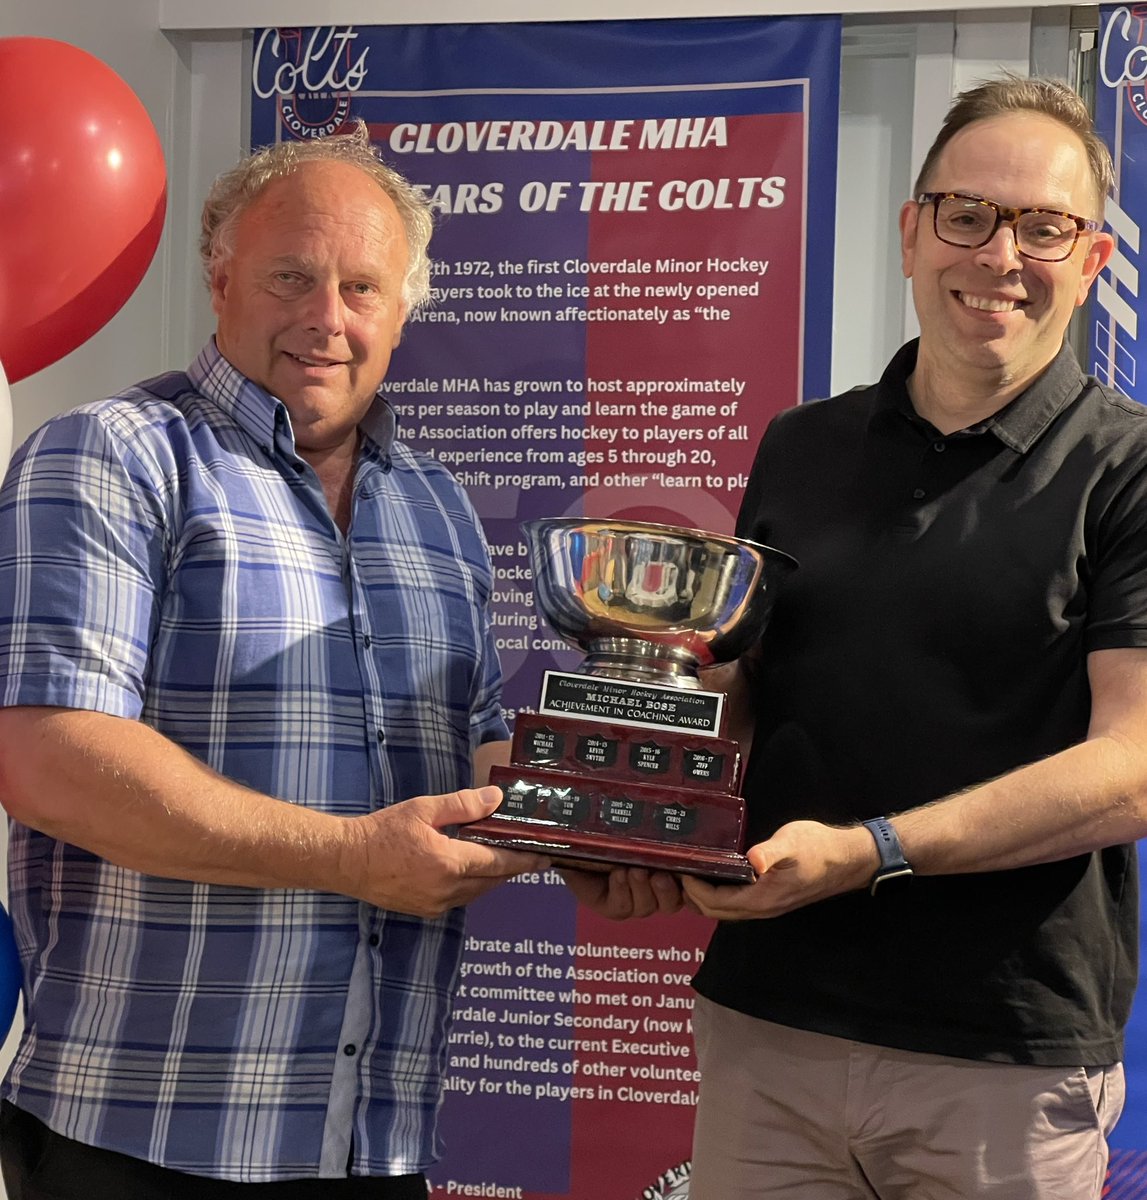 The Mike Bose Achievement in Coaching Award is for to someone who has Coached 8+ years, including mentoring others, and with a high degree of sportsmanship. 

Kurt Krieger embodies all of these qualities and more.

#50yearsofcoltshockey 
#coltsfamily
#cmhaawards2023